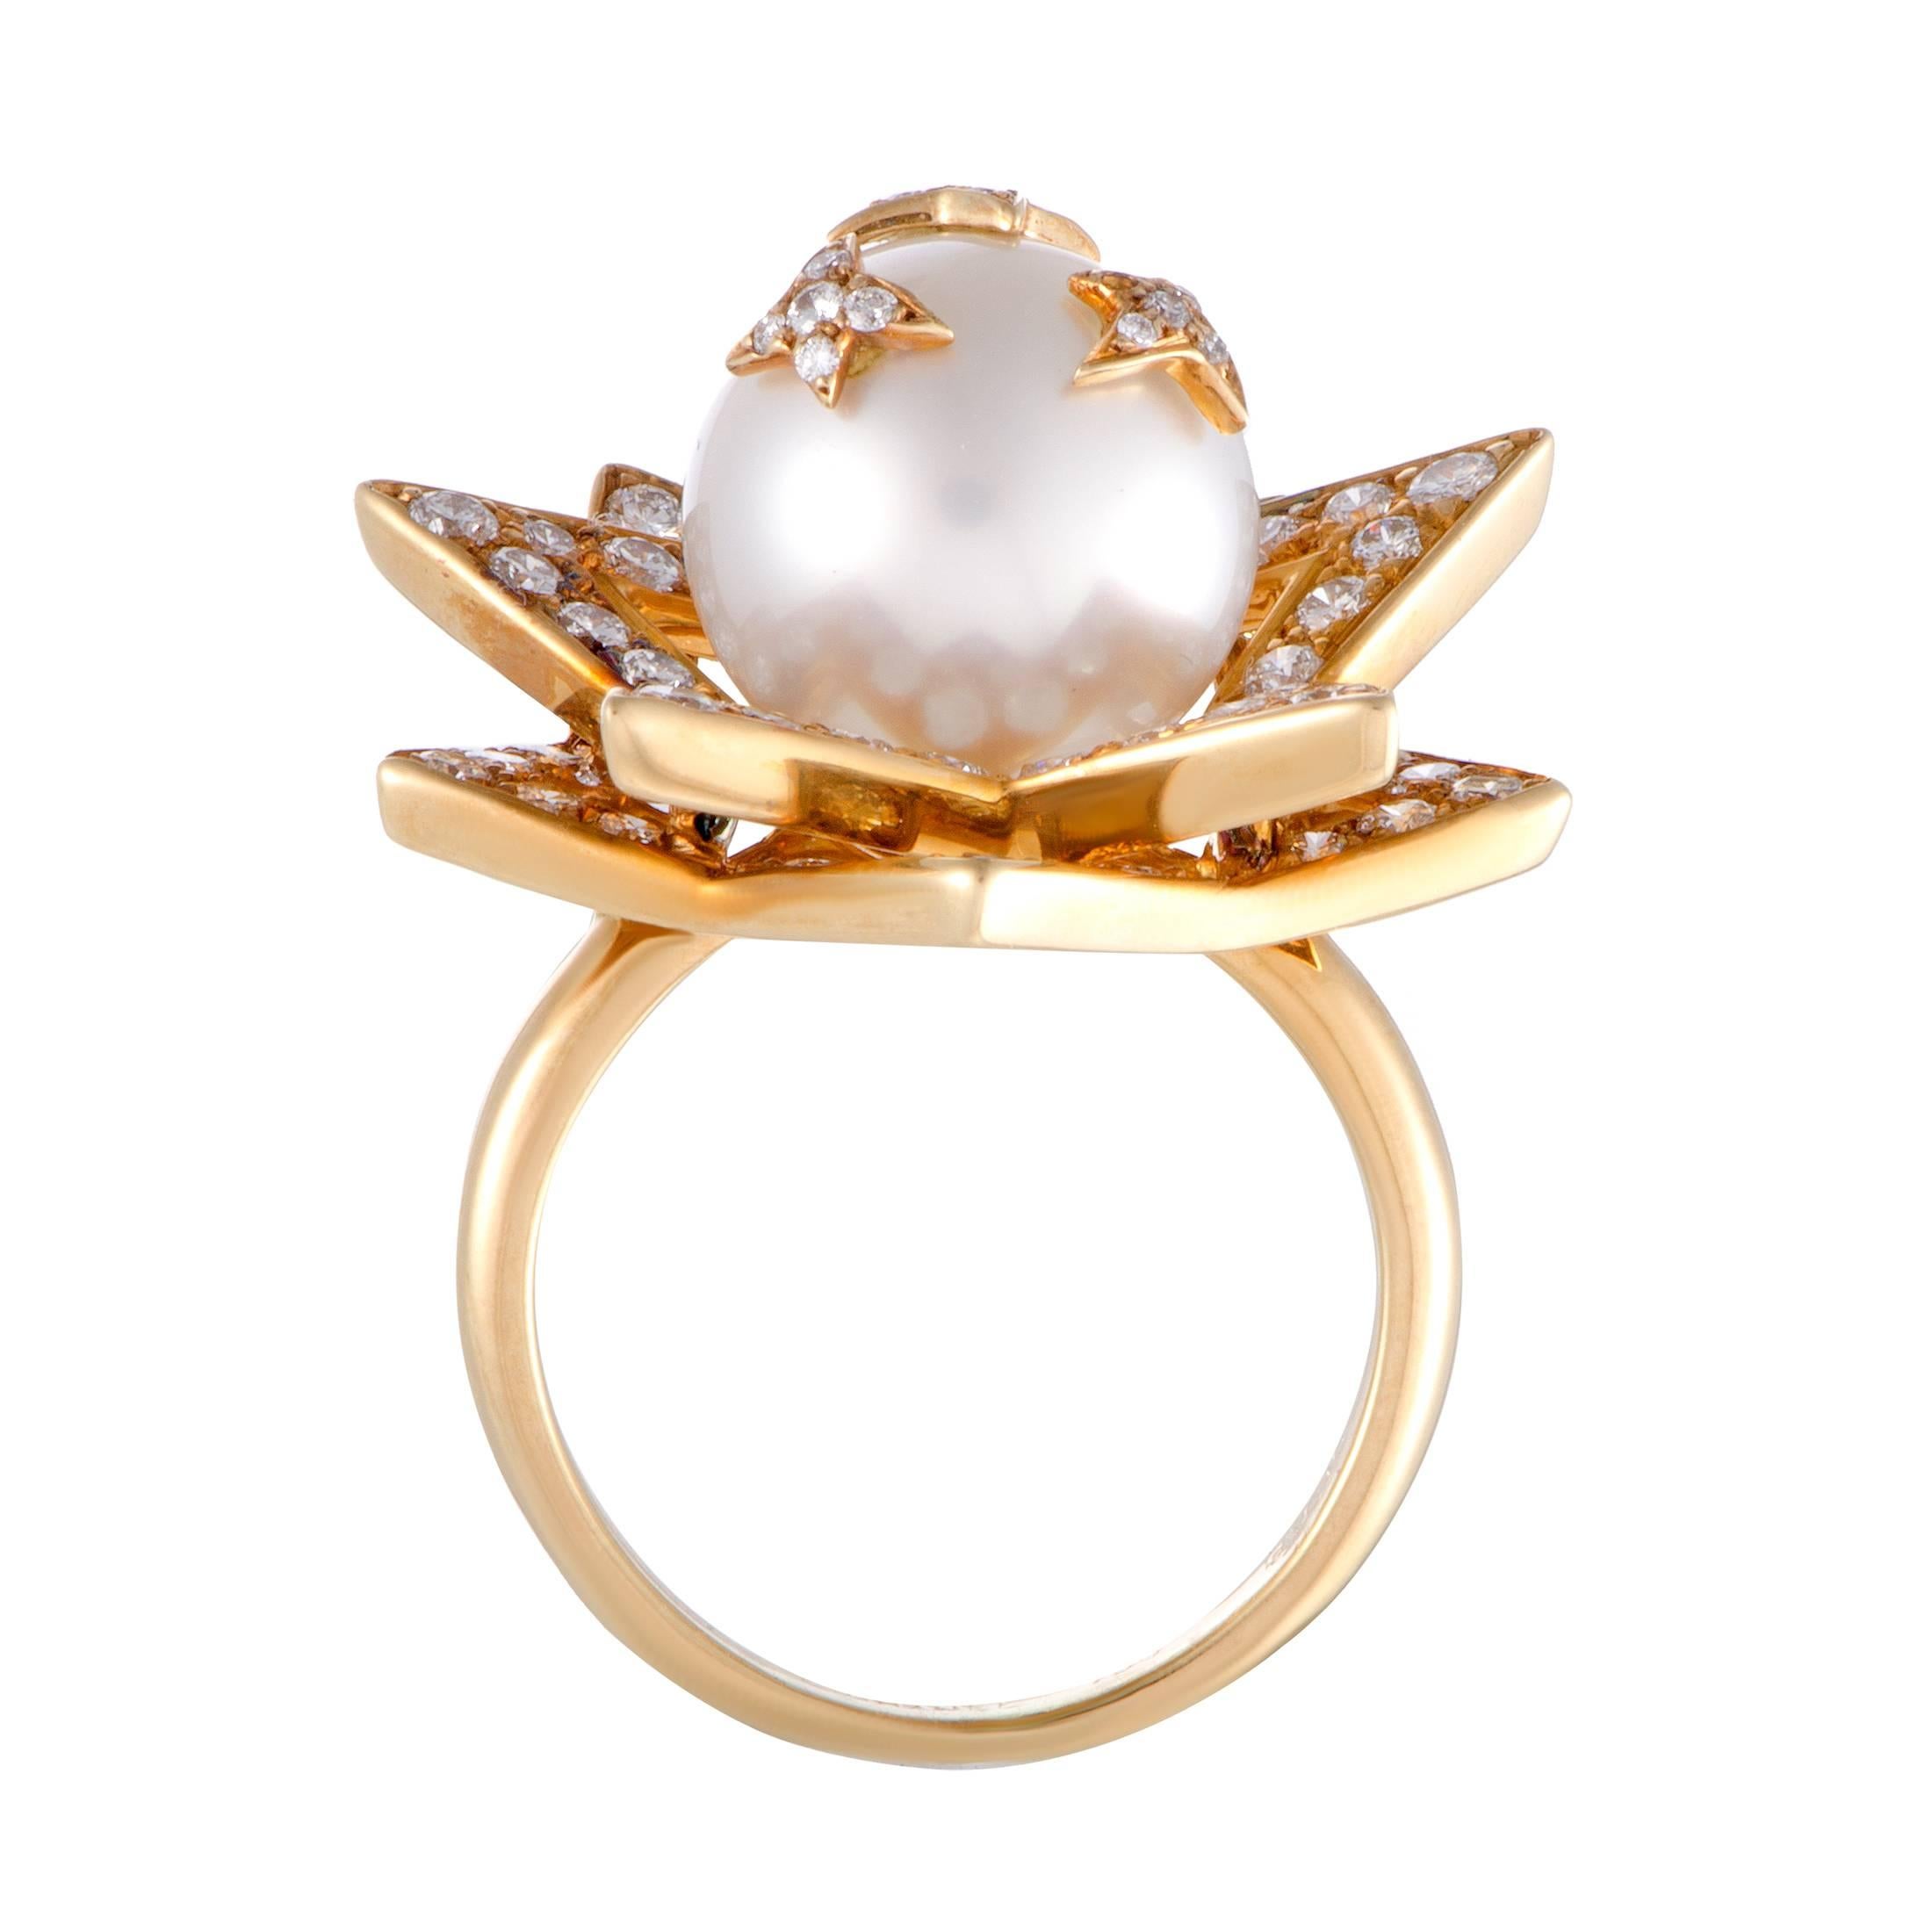 This remarkable 18K yellow gold ring by Chanel from its gorgeous 'Comette' collection is exceptionally sublime! The beautifully unique design is adorned in 1.20ct of sparkling diamonds and a magnificent white pearl that perfectly epitomizes elegance